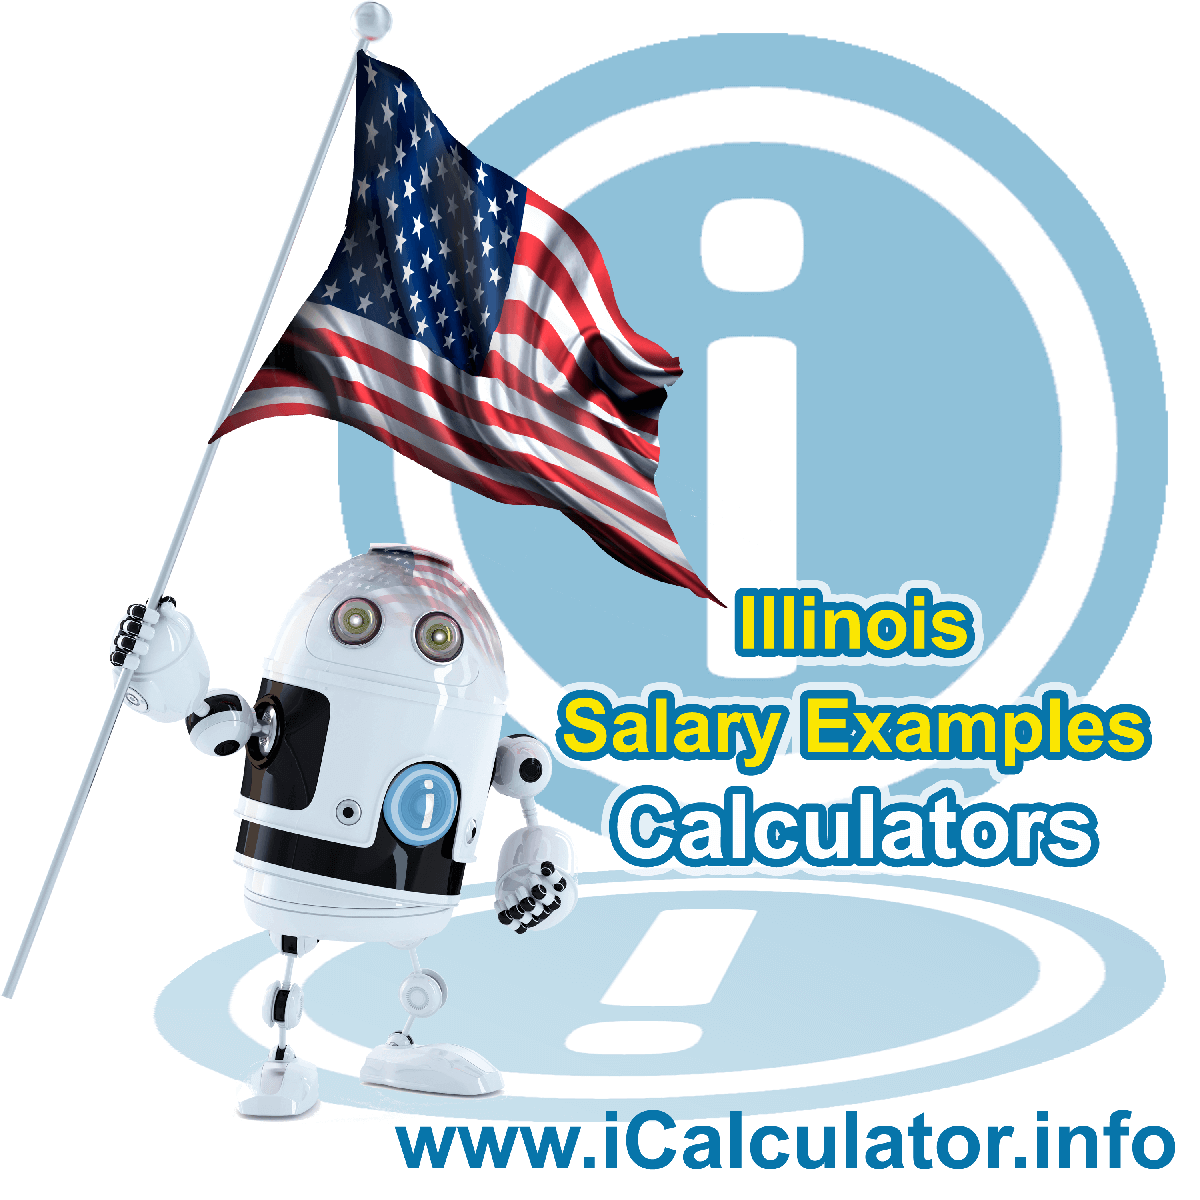 Illinois Salary Example for $ 110,000.00 in 2023 | iCalculator™ | $ 110,000.00 salary example for employee and employer paying Illinois State tincome taxes. Detailed salary after tax calculation including Illinois State Tax, Federal State Tax, Medicare Deductions, Social Security, Capital Gains and other income tax and salary deductions complete with supporting Illinois state tax tables 